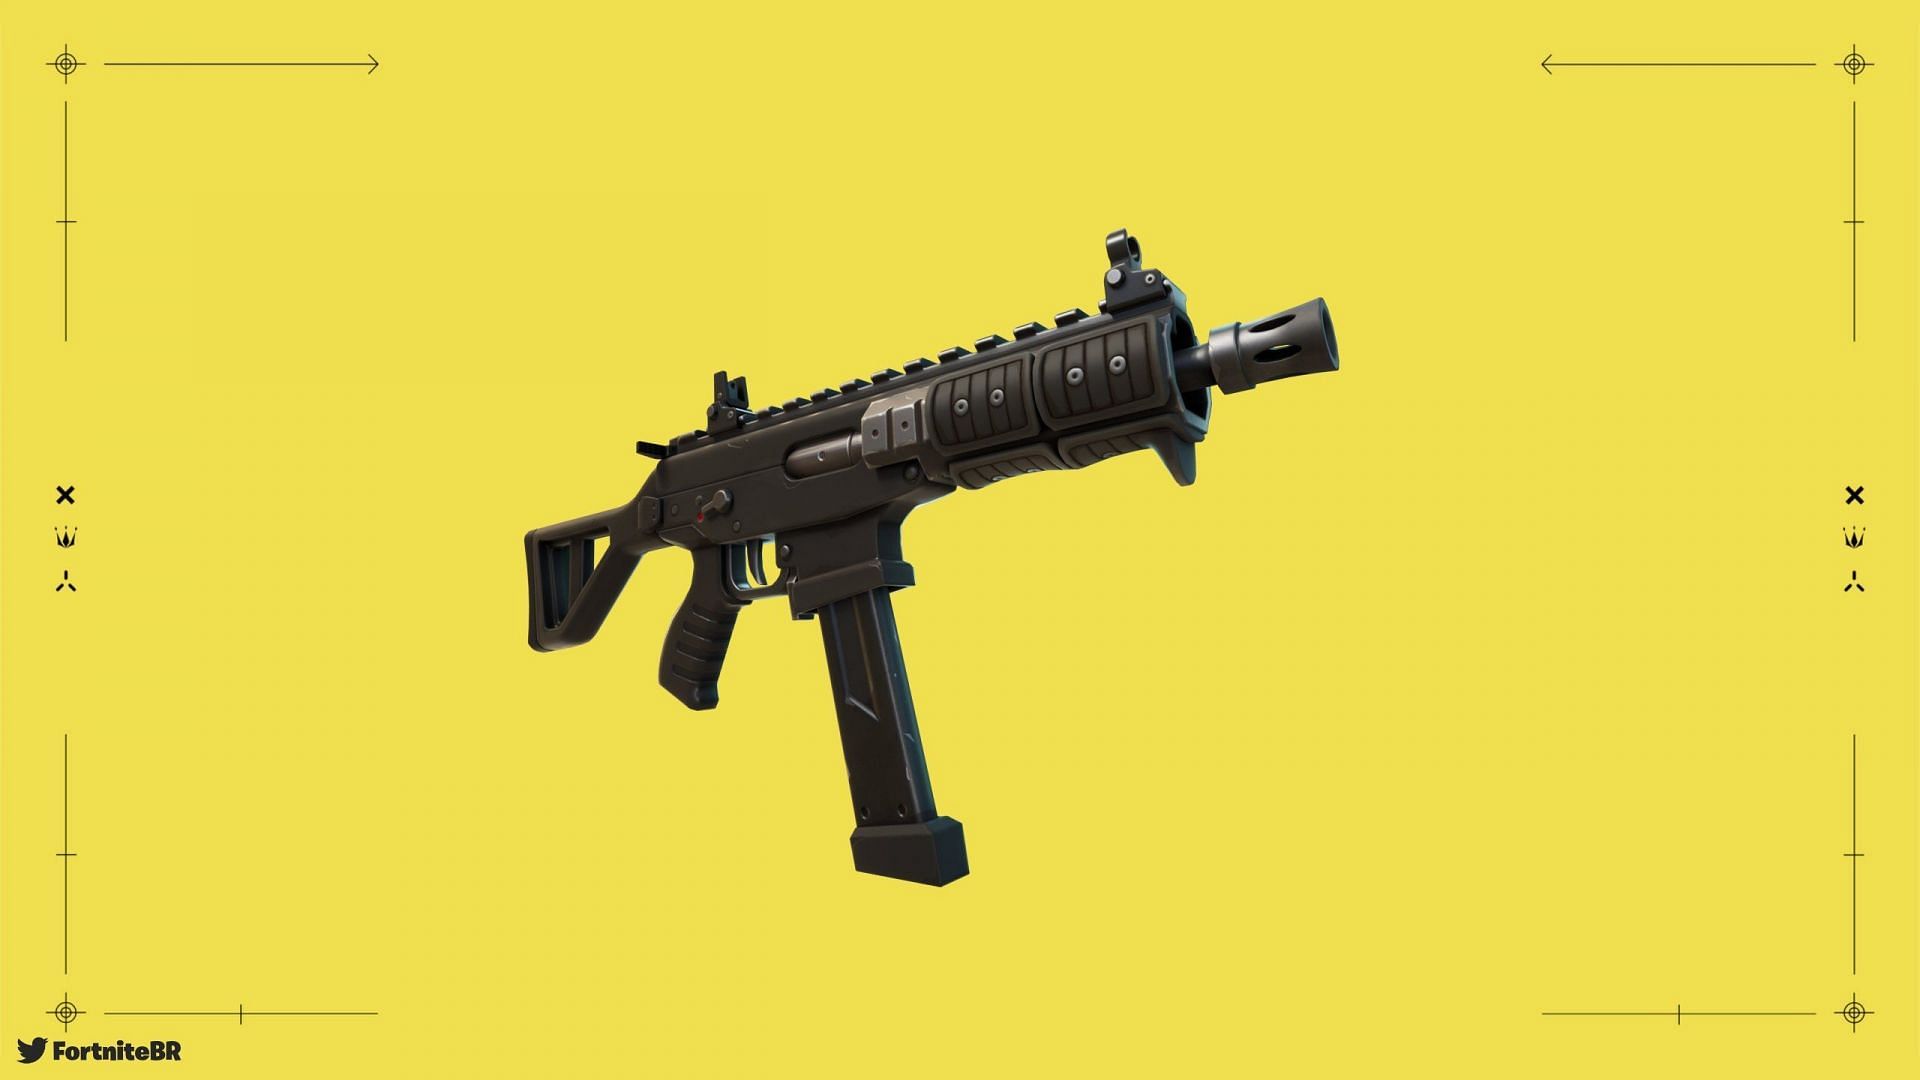 Despite its vaulting, the Combat SMG is still one of the most popular Fortnite weapons (Image via Epic Games)